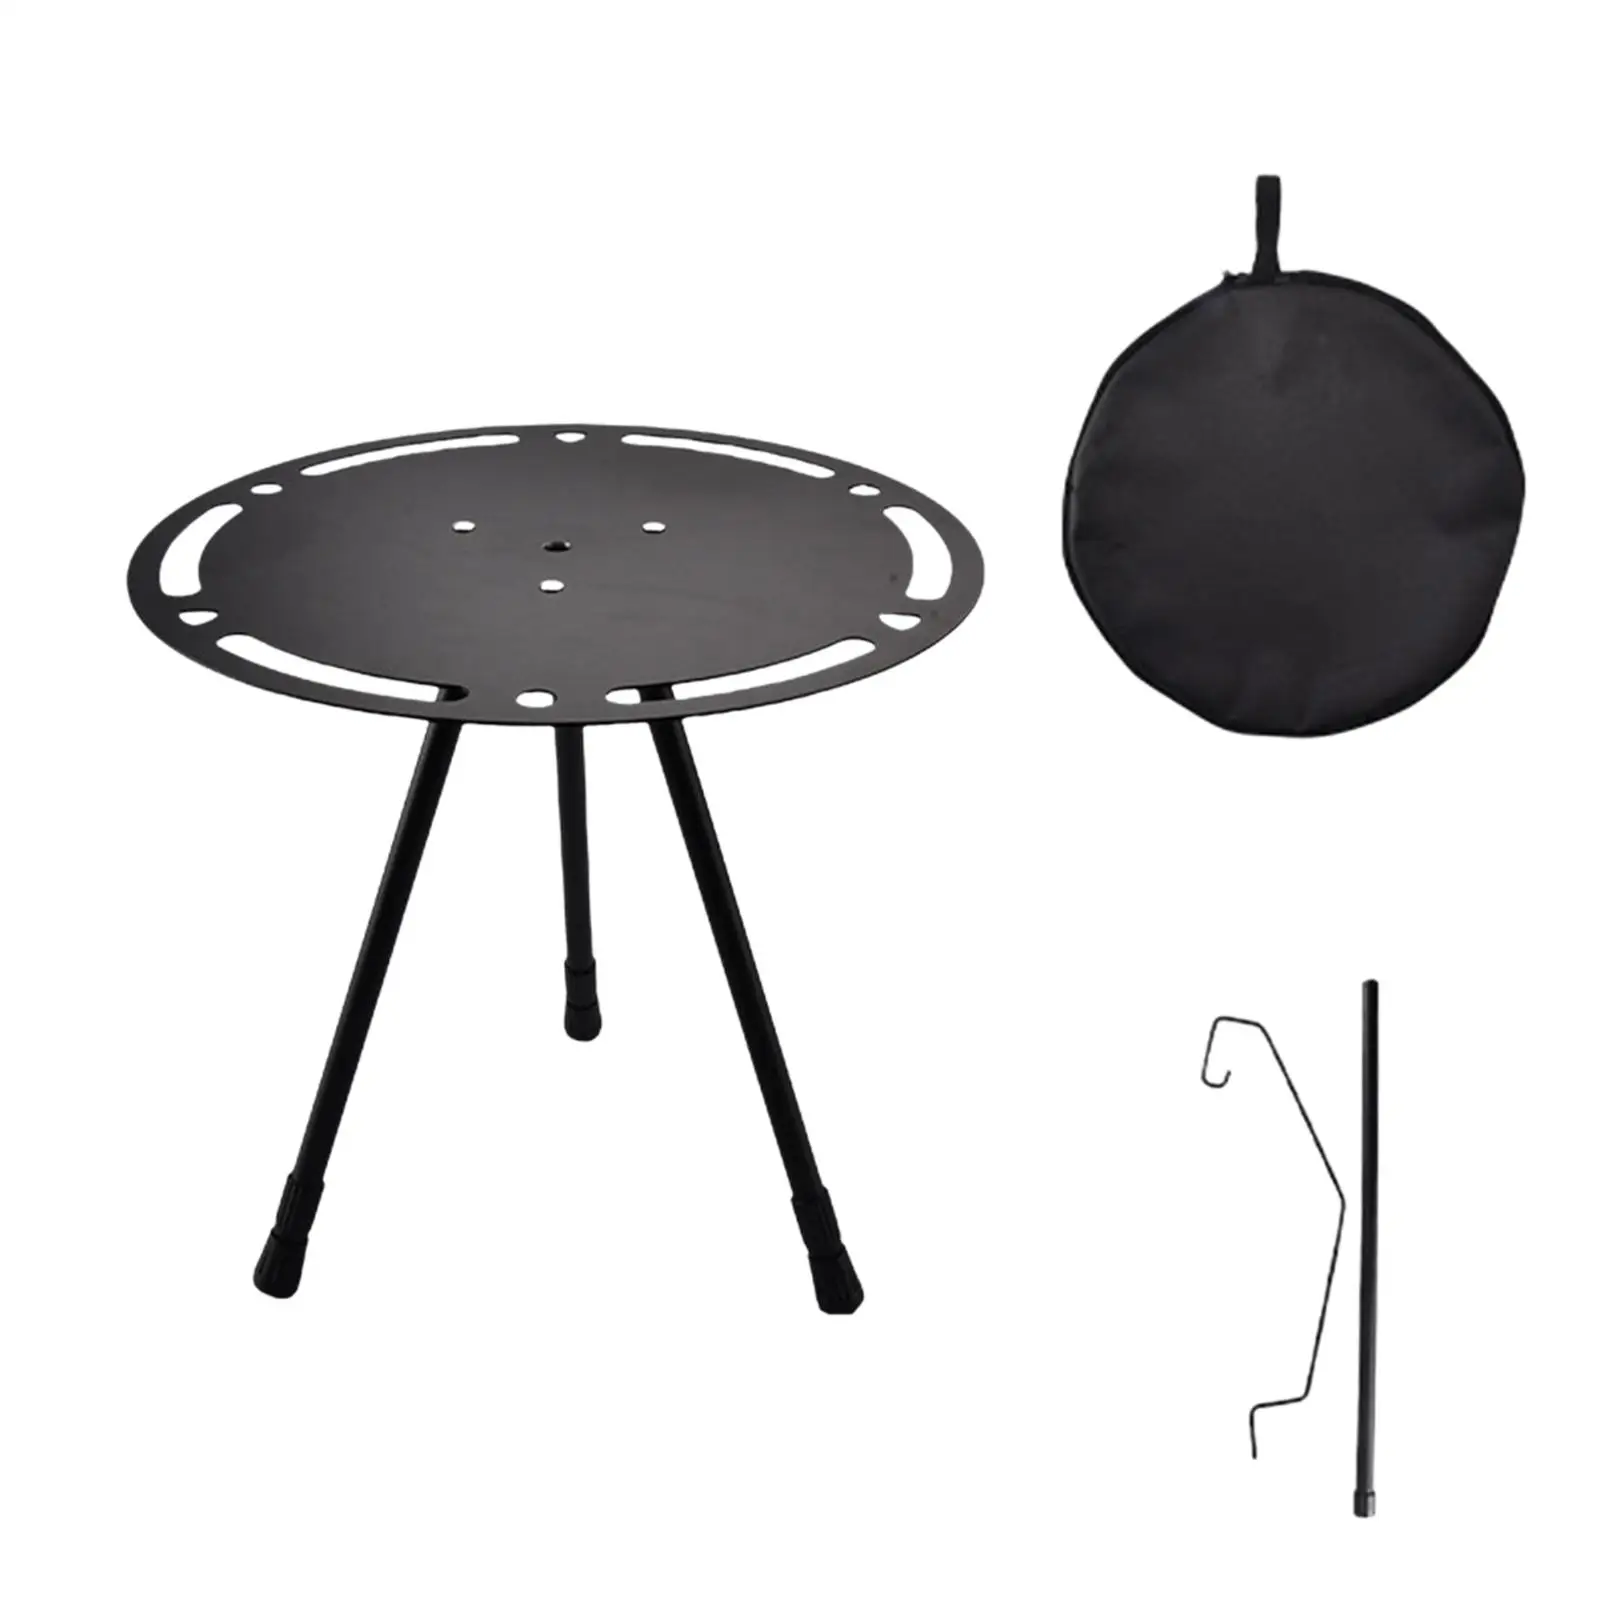 Portable Table Retractable Legs Aluminum Alloy Round Camping Side Table for Travel Picnic Outdoor Garden Camping